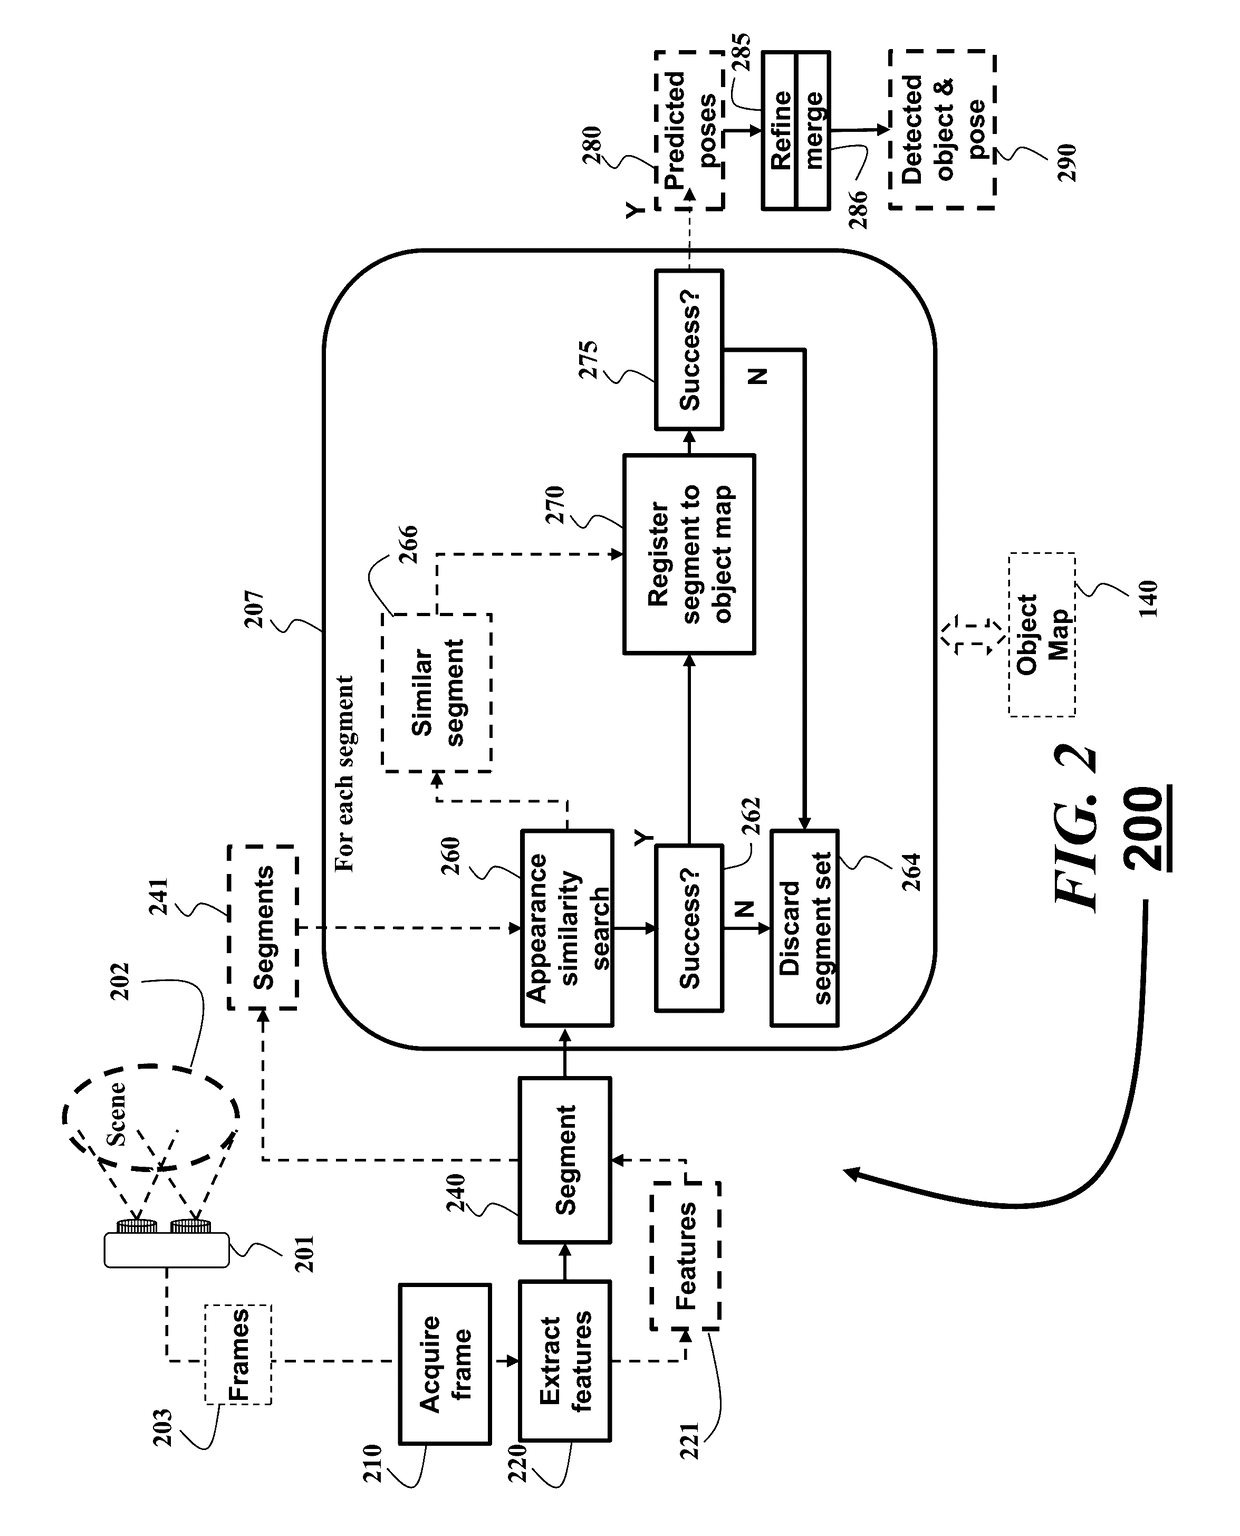 Method and System for Detecting and Tracking Objects and SLAM with Hierarchical Feature Grouping